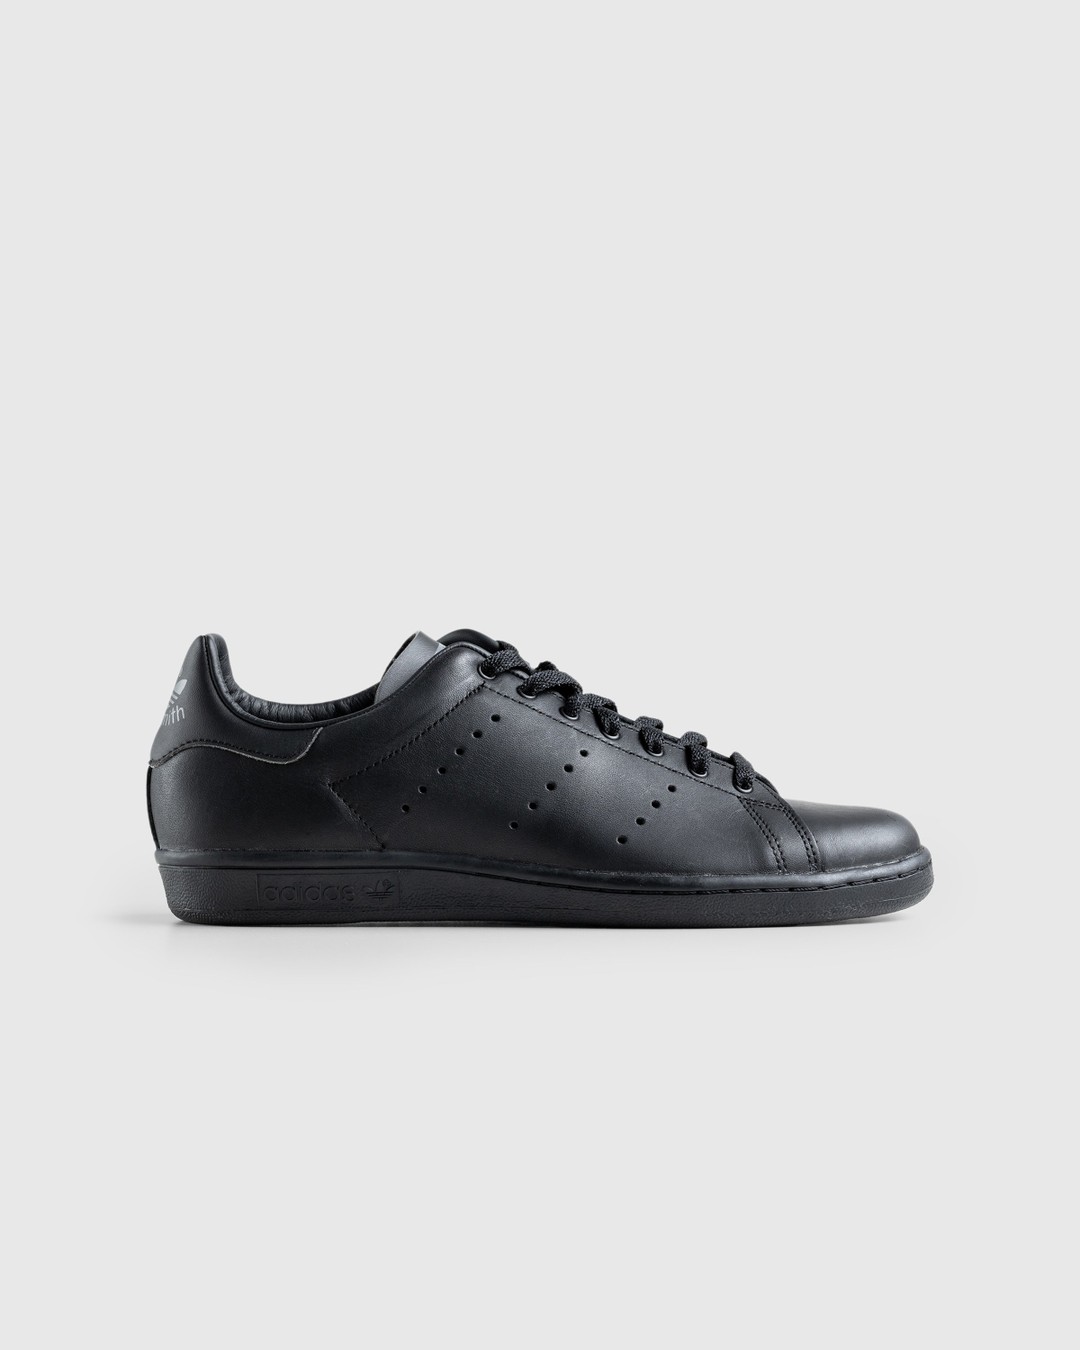 Adidas Stan Smith 80s Sneakers